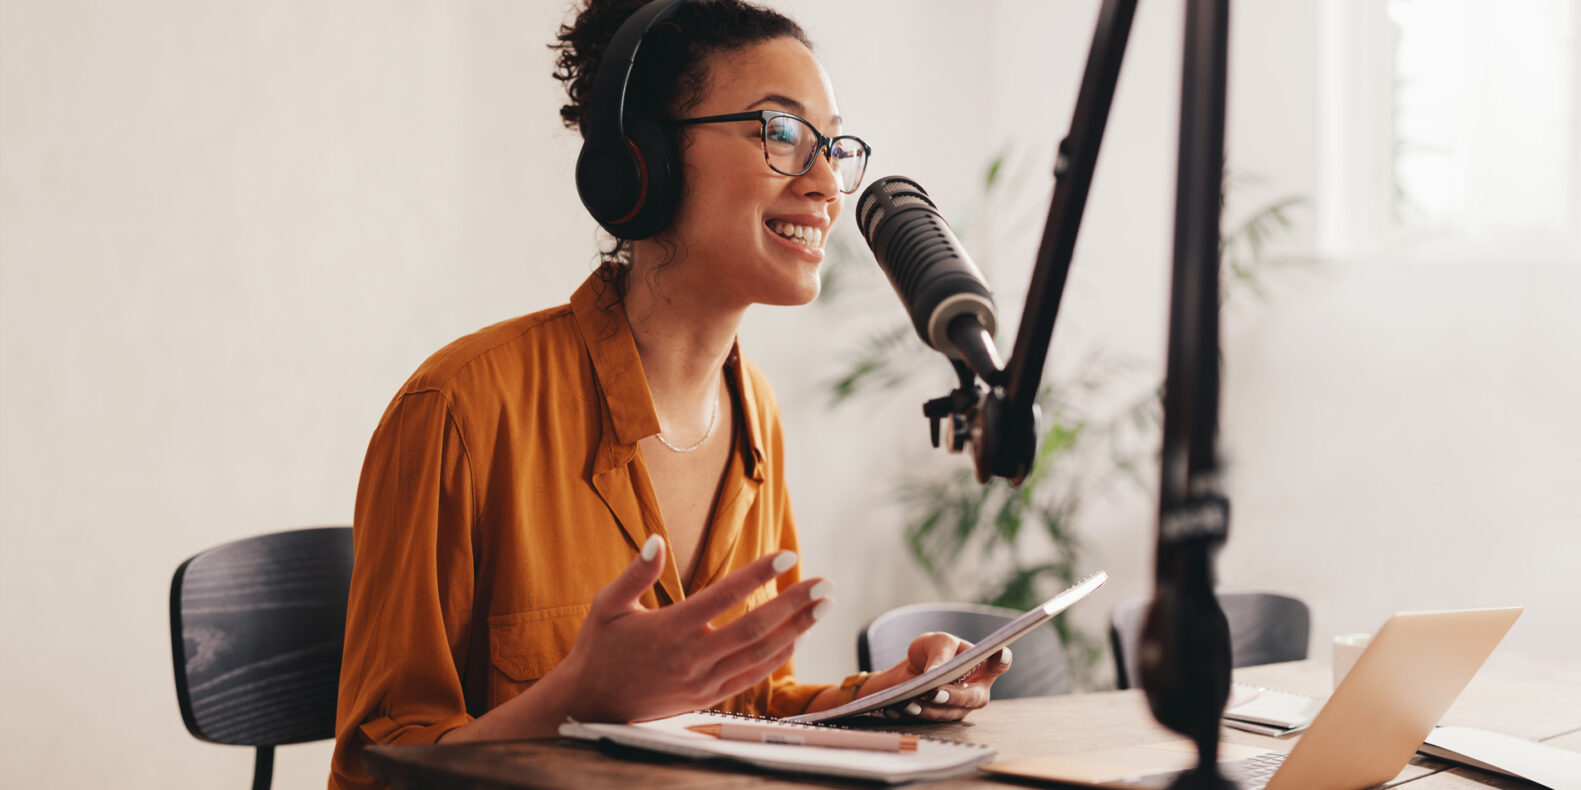 6 Drug Safety Podcasts: A Listening Guide